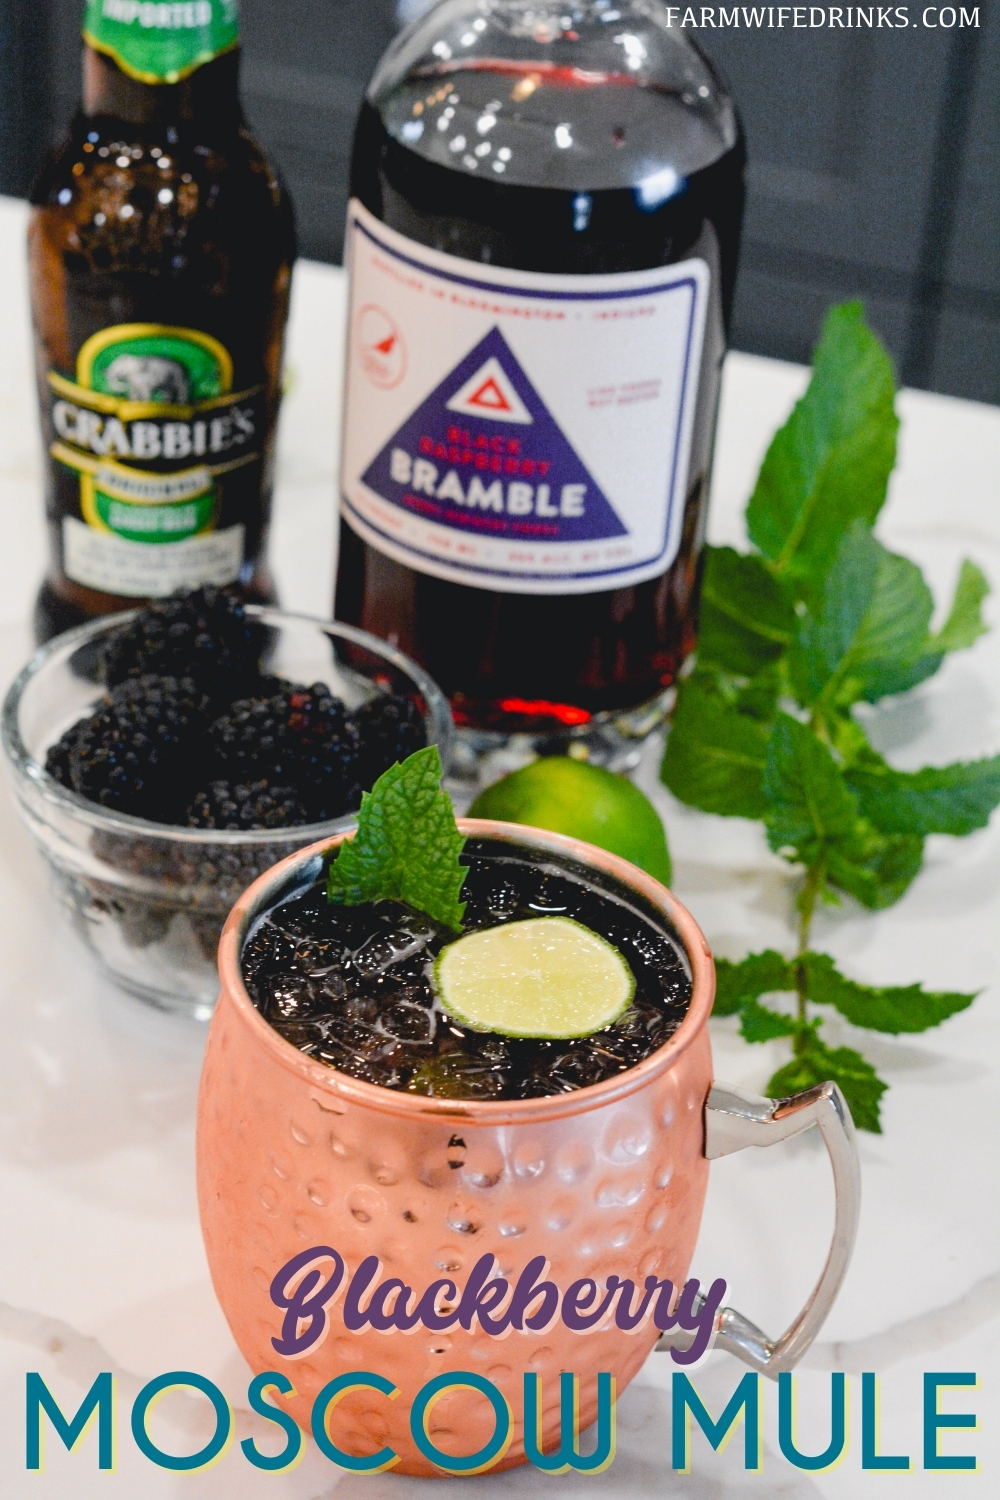 Blackberry Moscow Mules are just what summer order with the combination of blackberry-infused vodka with ginger beer and lime juice, topped with mint and fresh blackberries to make one of my favorite Moscow Mule recipes.